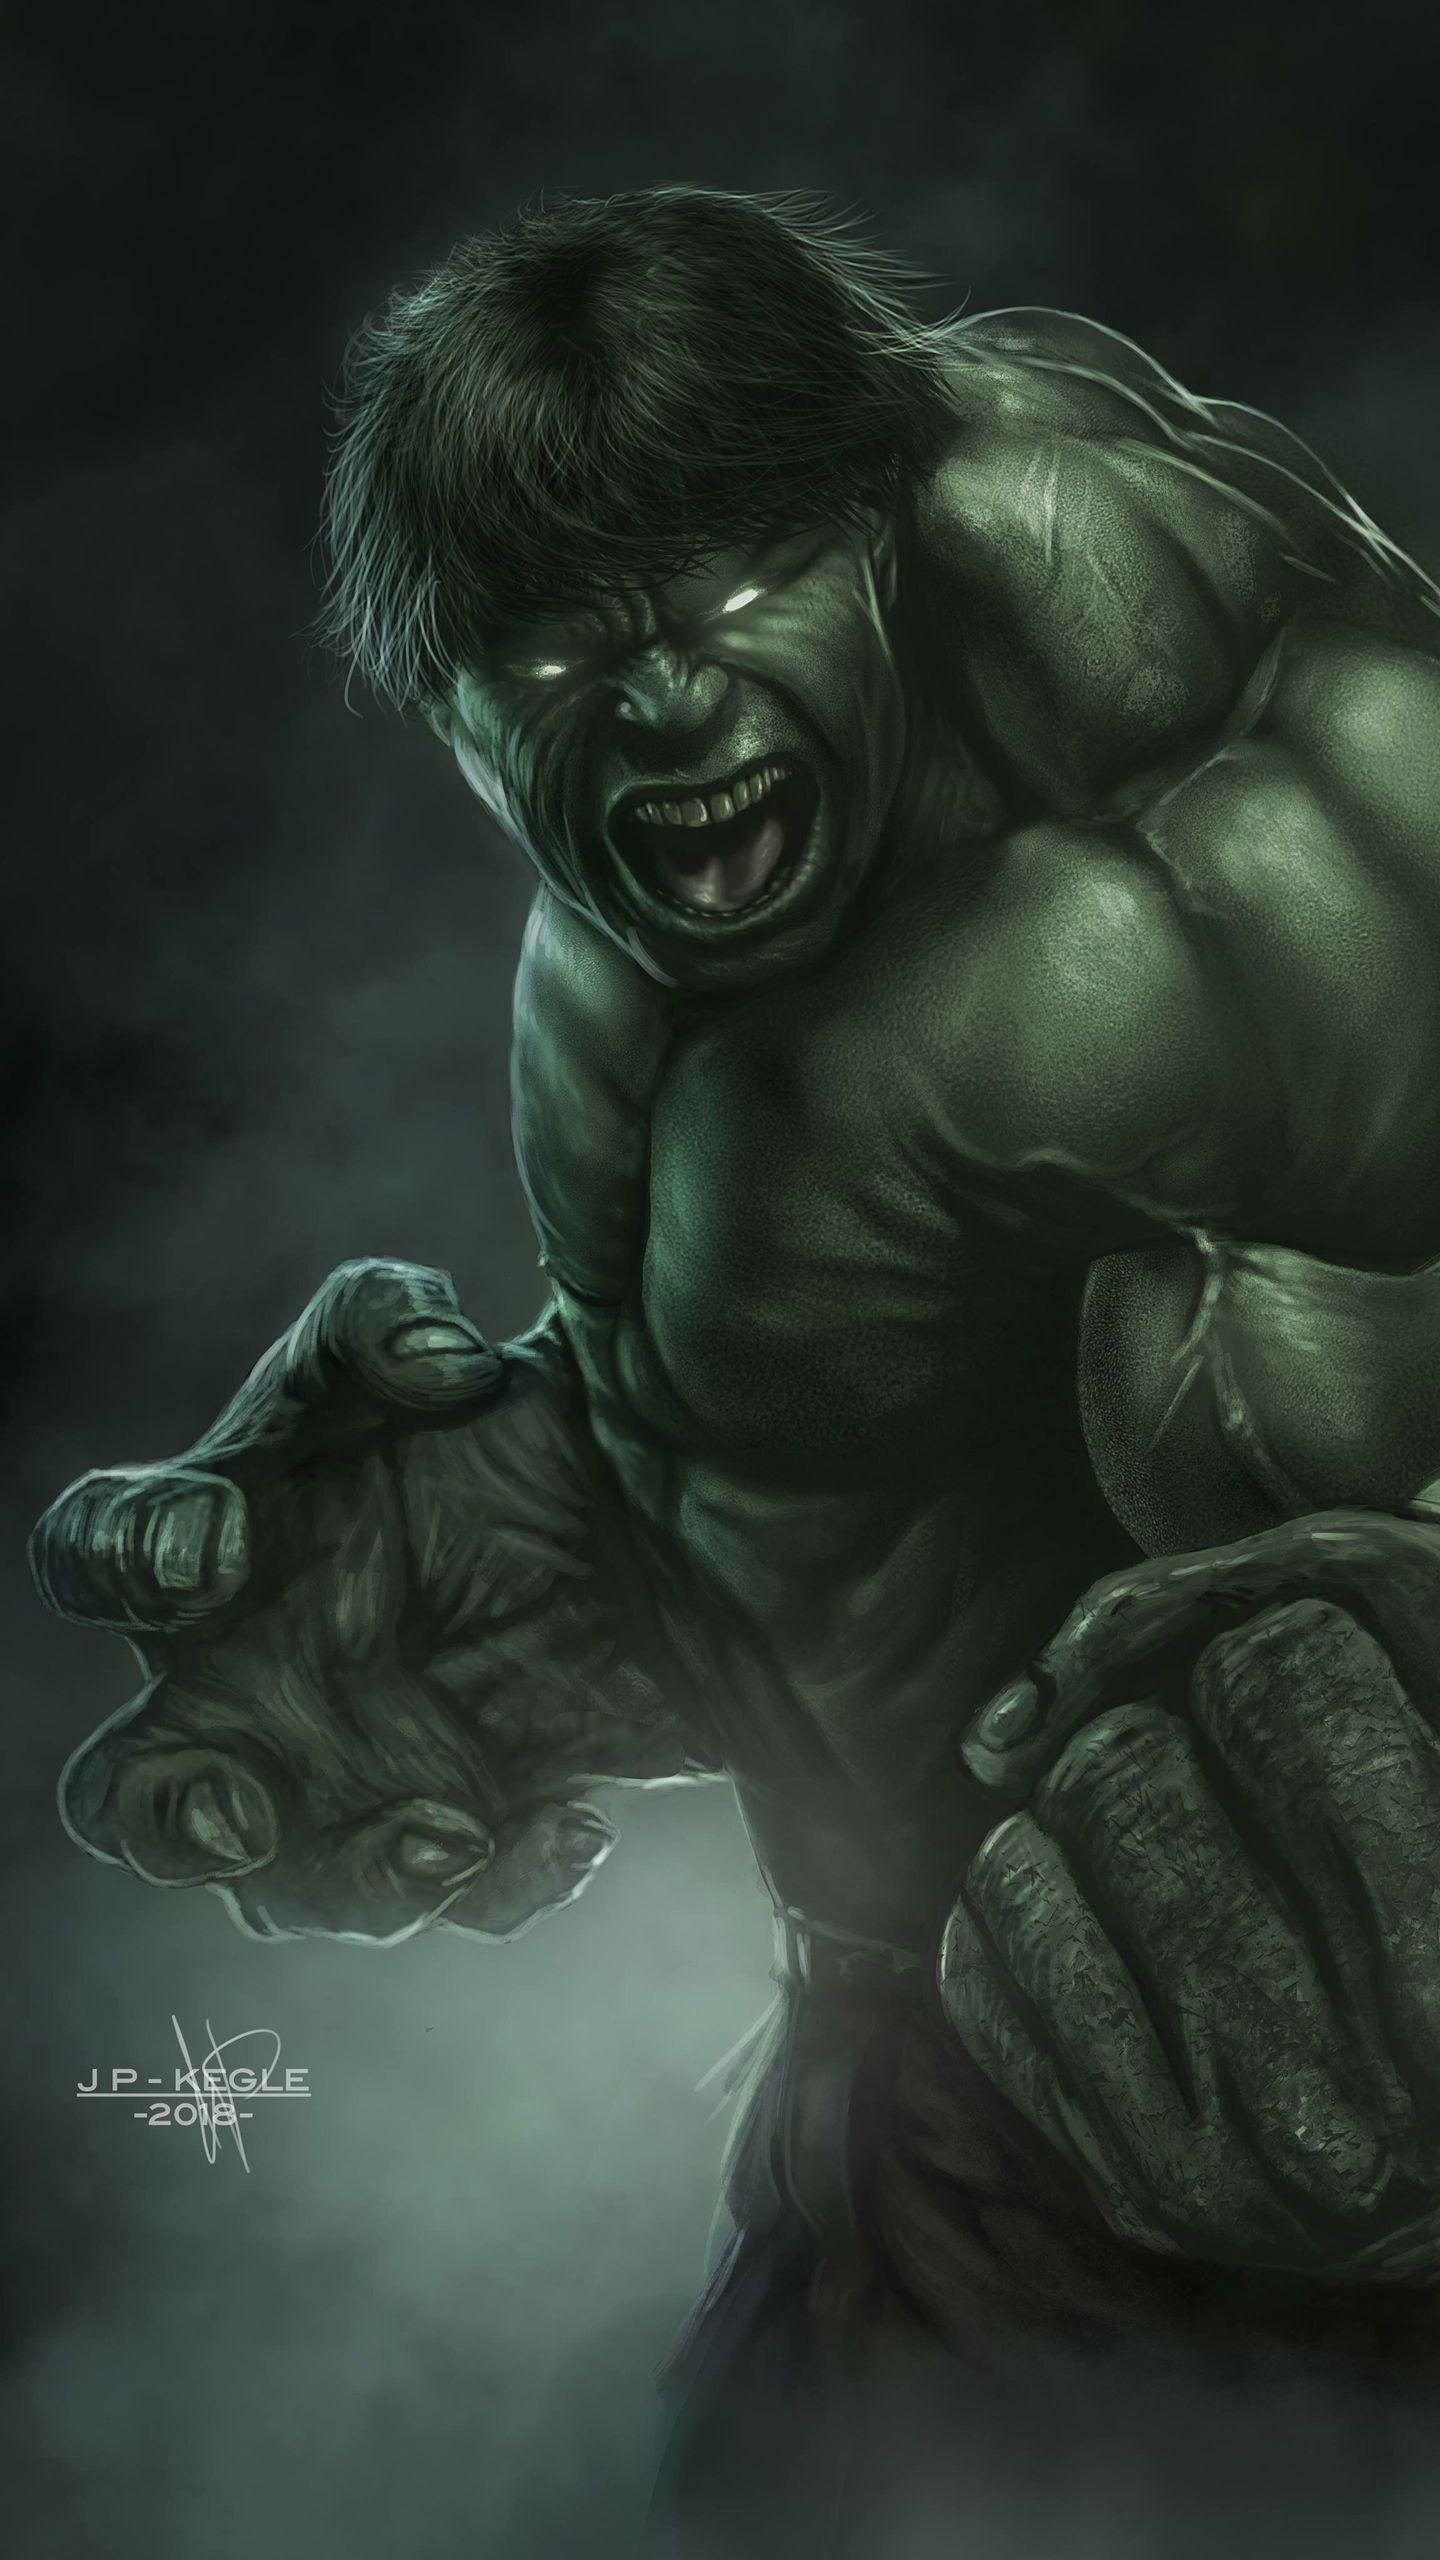 CAN YOU QUALIFY THE INCREDIBLE HULK QUIZ?